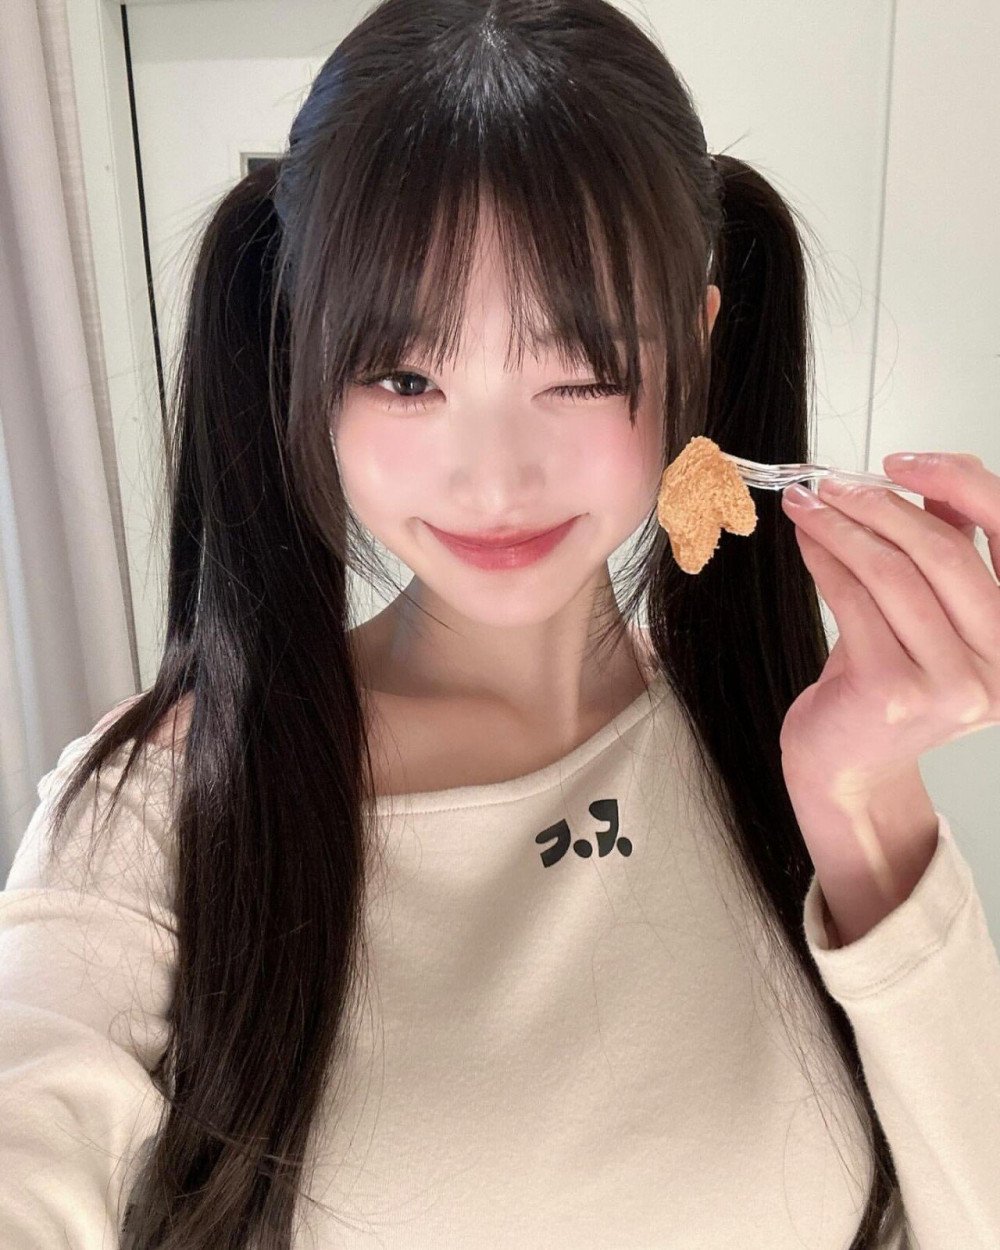 Korean netizens spark a discussion over a recent photo of Jang Won Young and her doll.